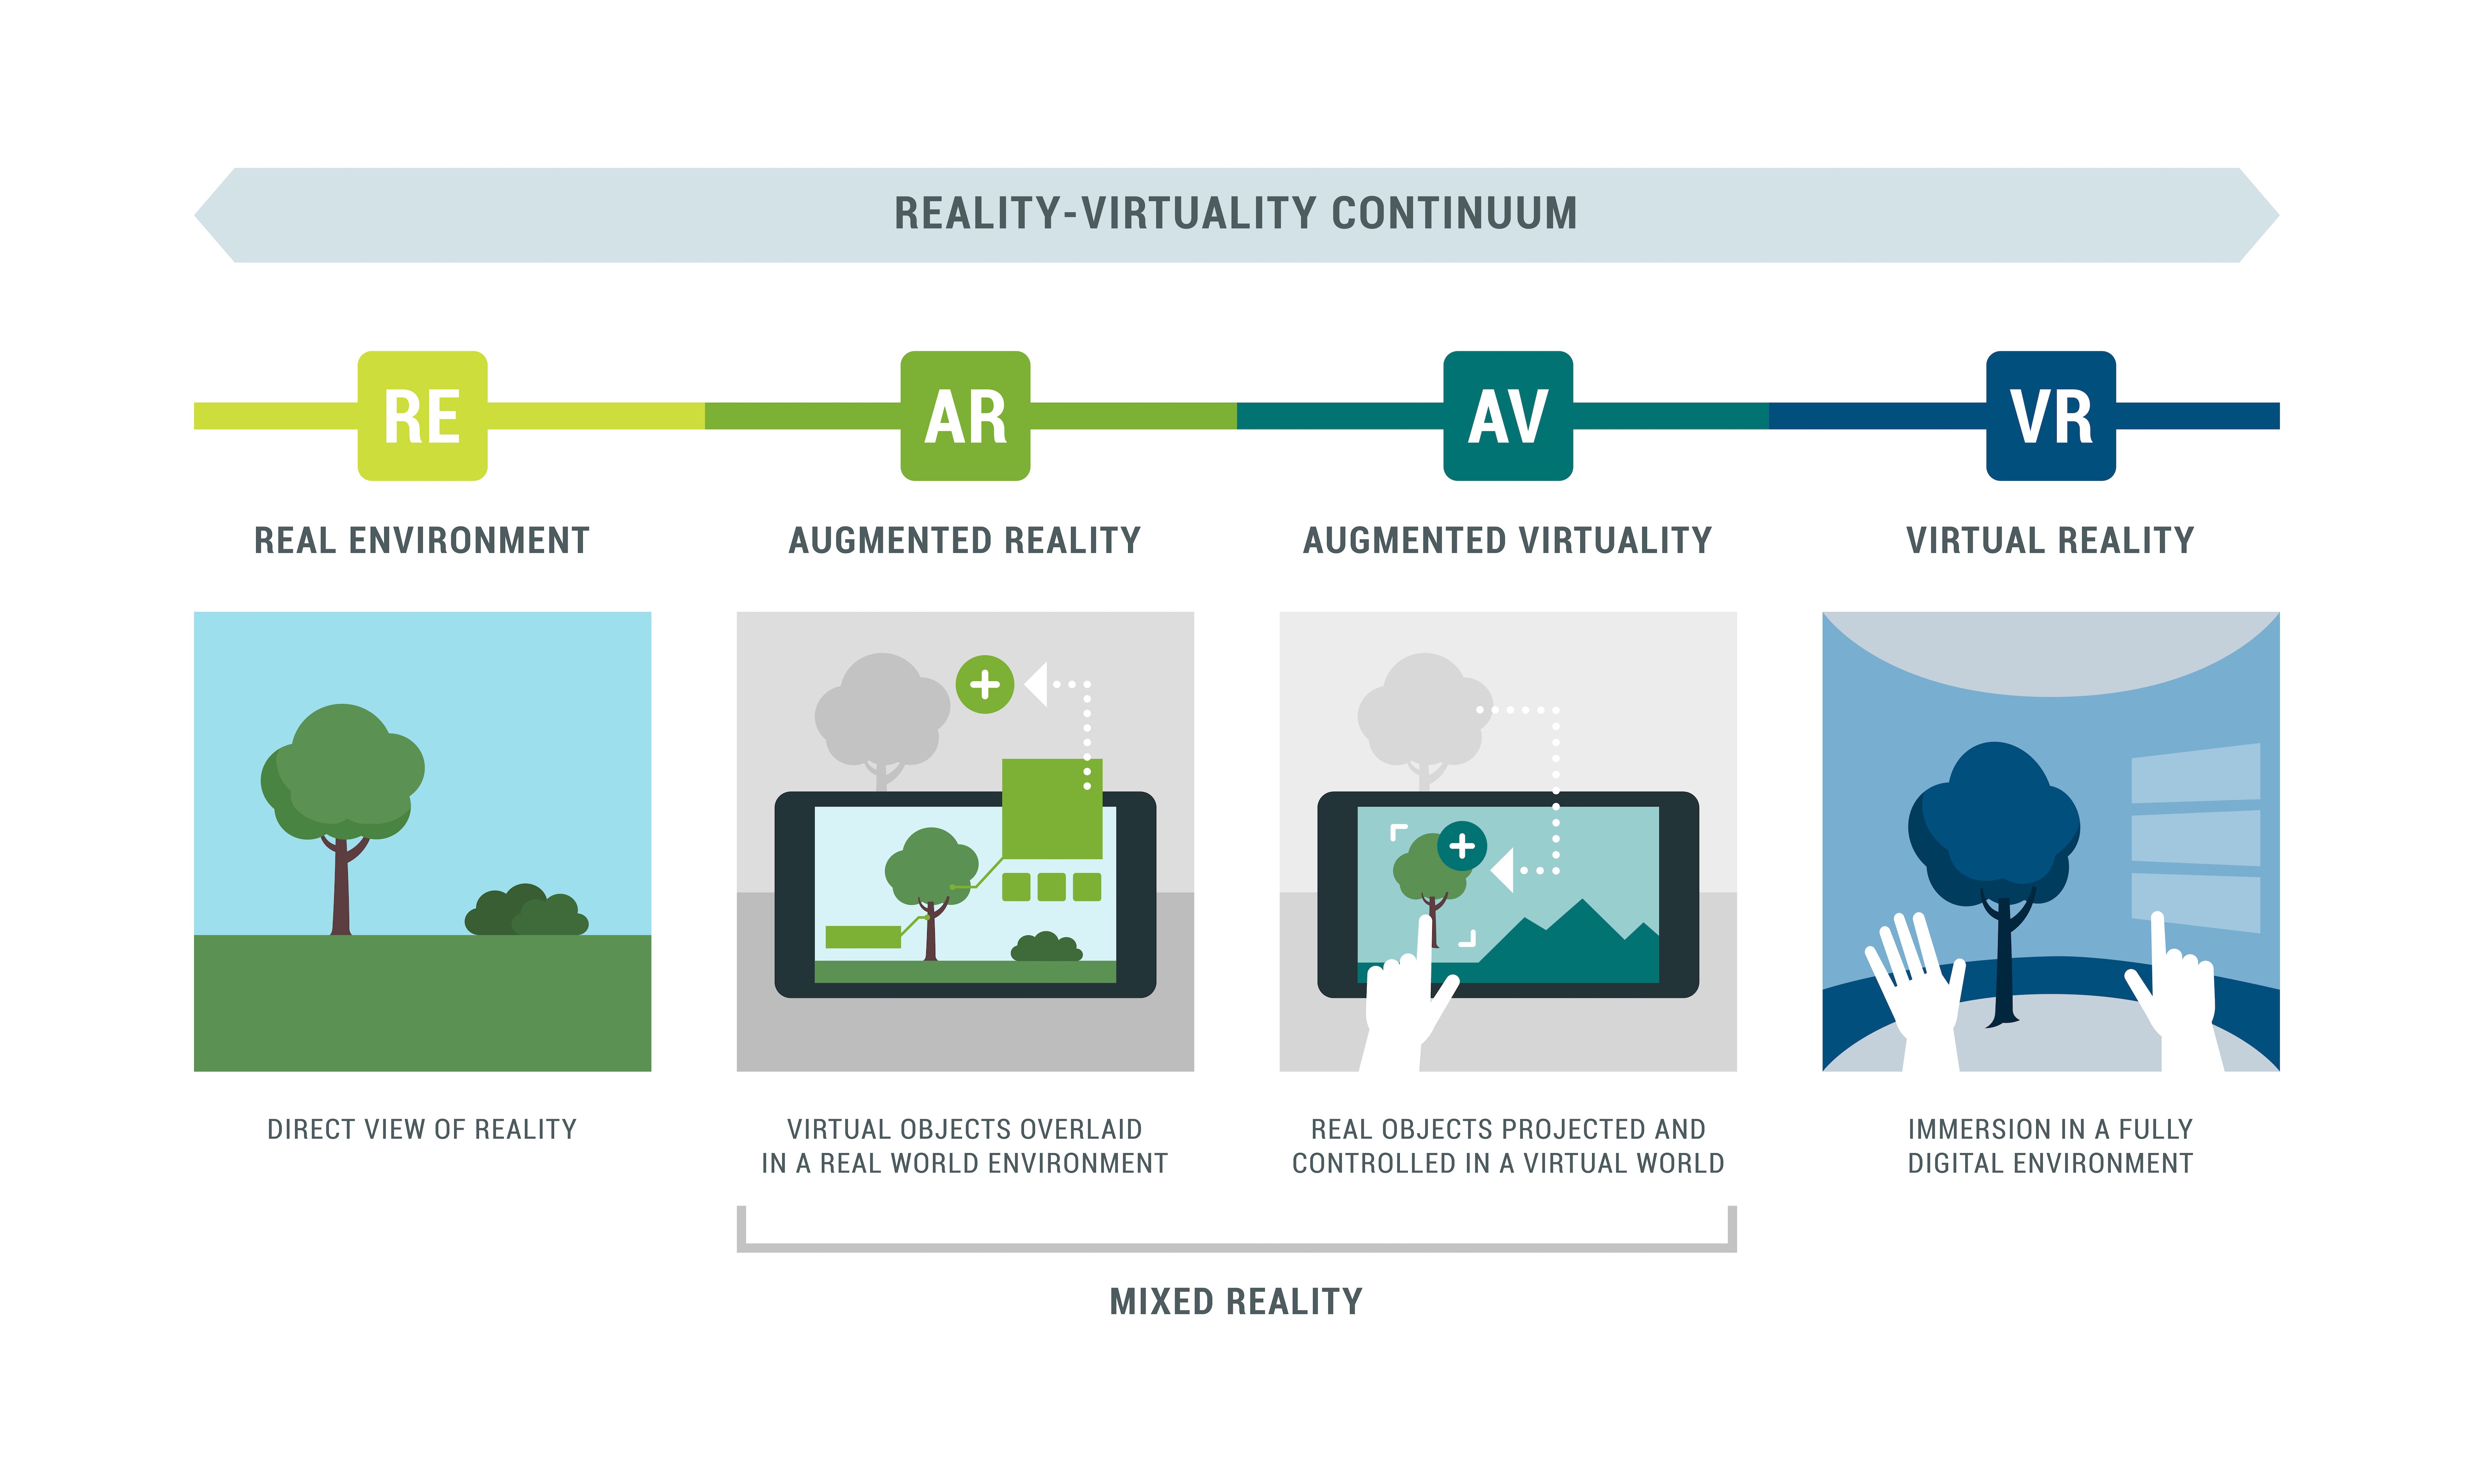 The continuum of virtual reality. On the left side there is a direct view of reality. The middle two images show virtual reality overlayed on to the real world. While the right shows full virtual reality. 